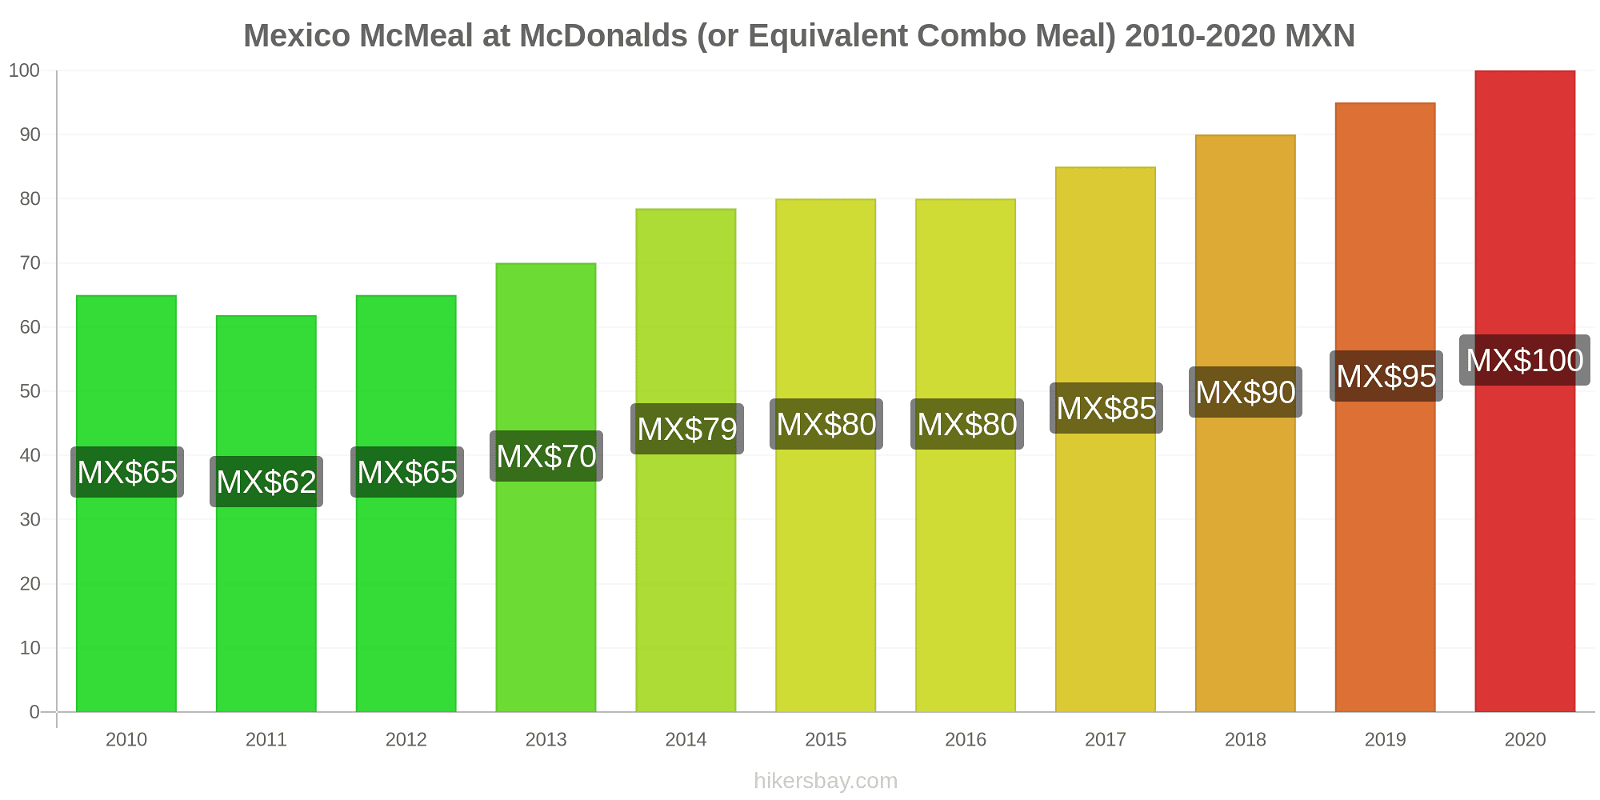 Mexico price changes McMeal at McDonalds (or Equivalent Combo Meal) hikersbay.com